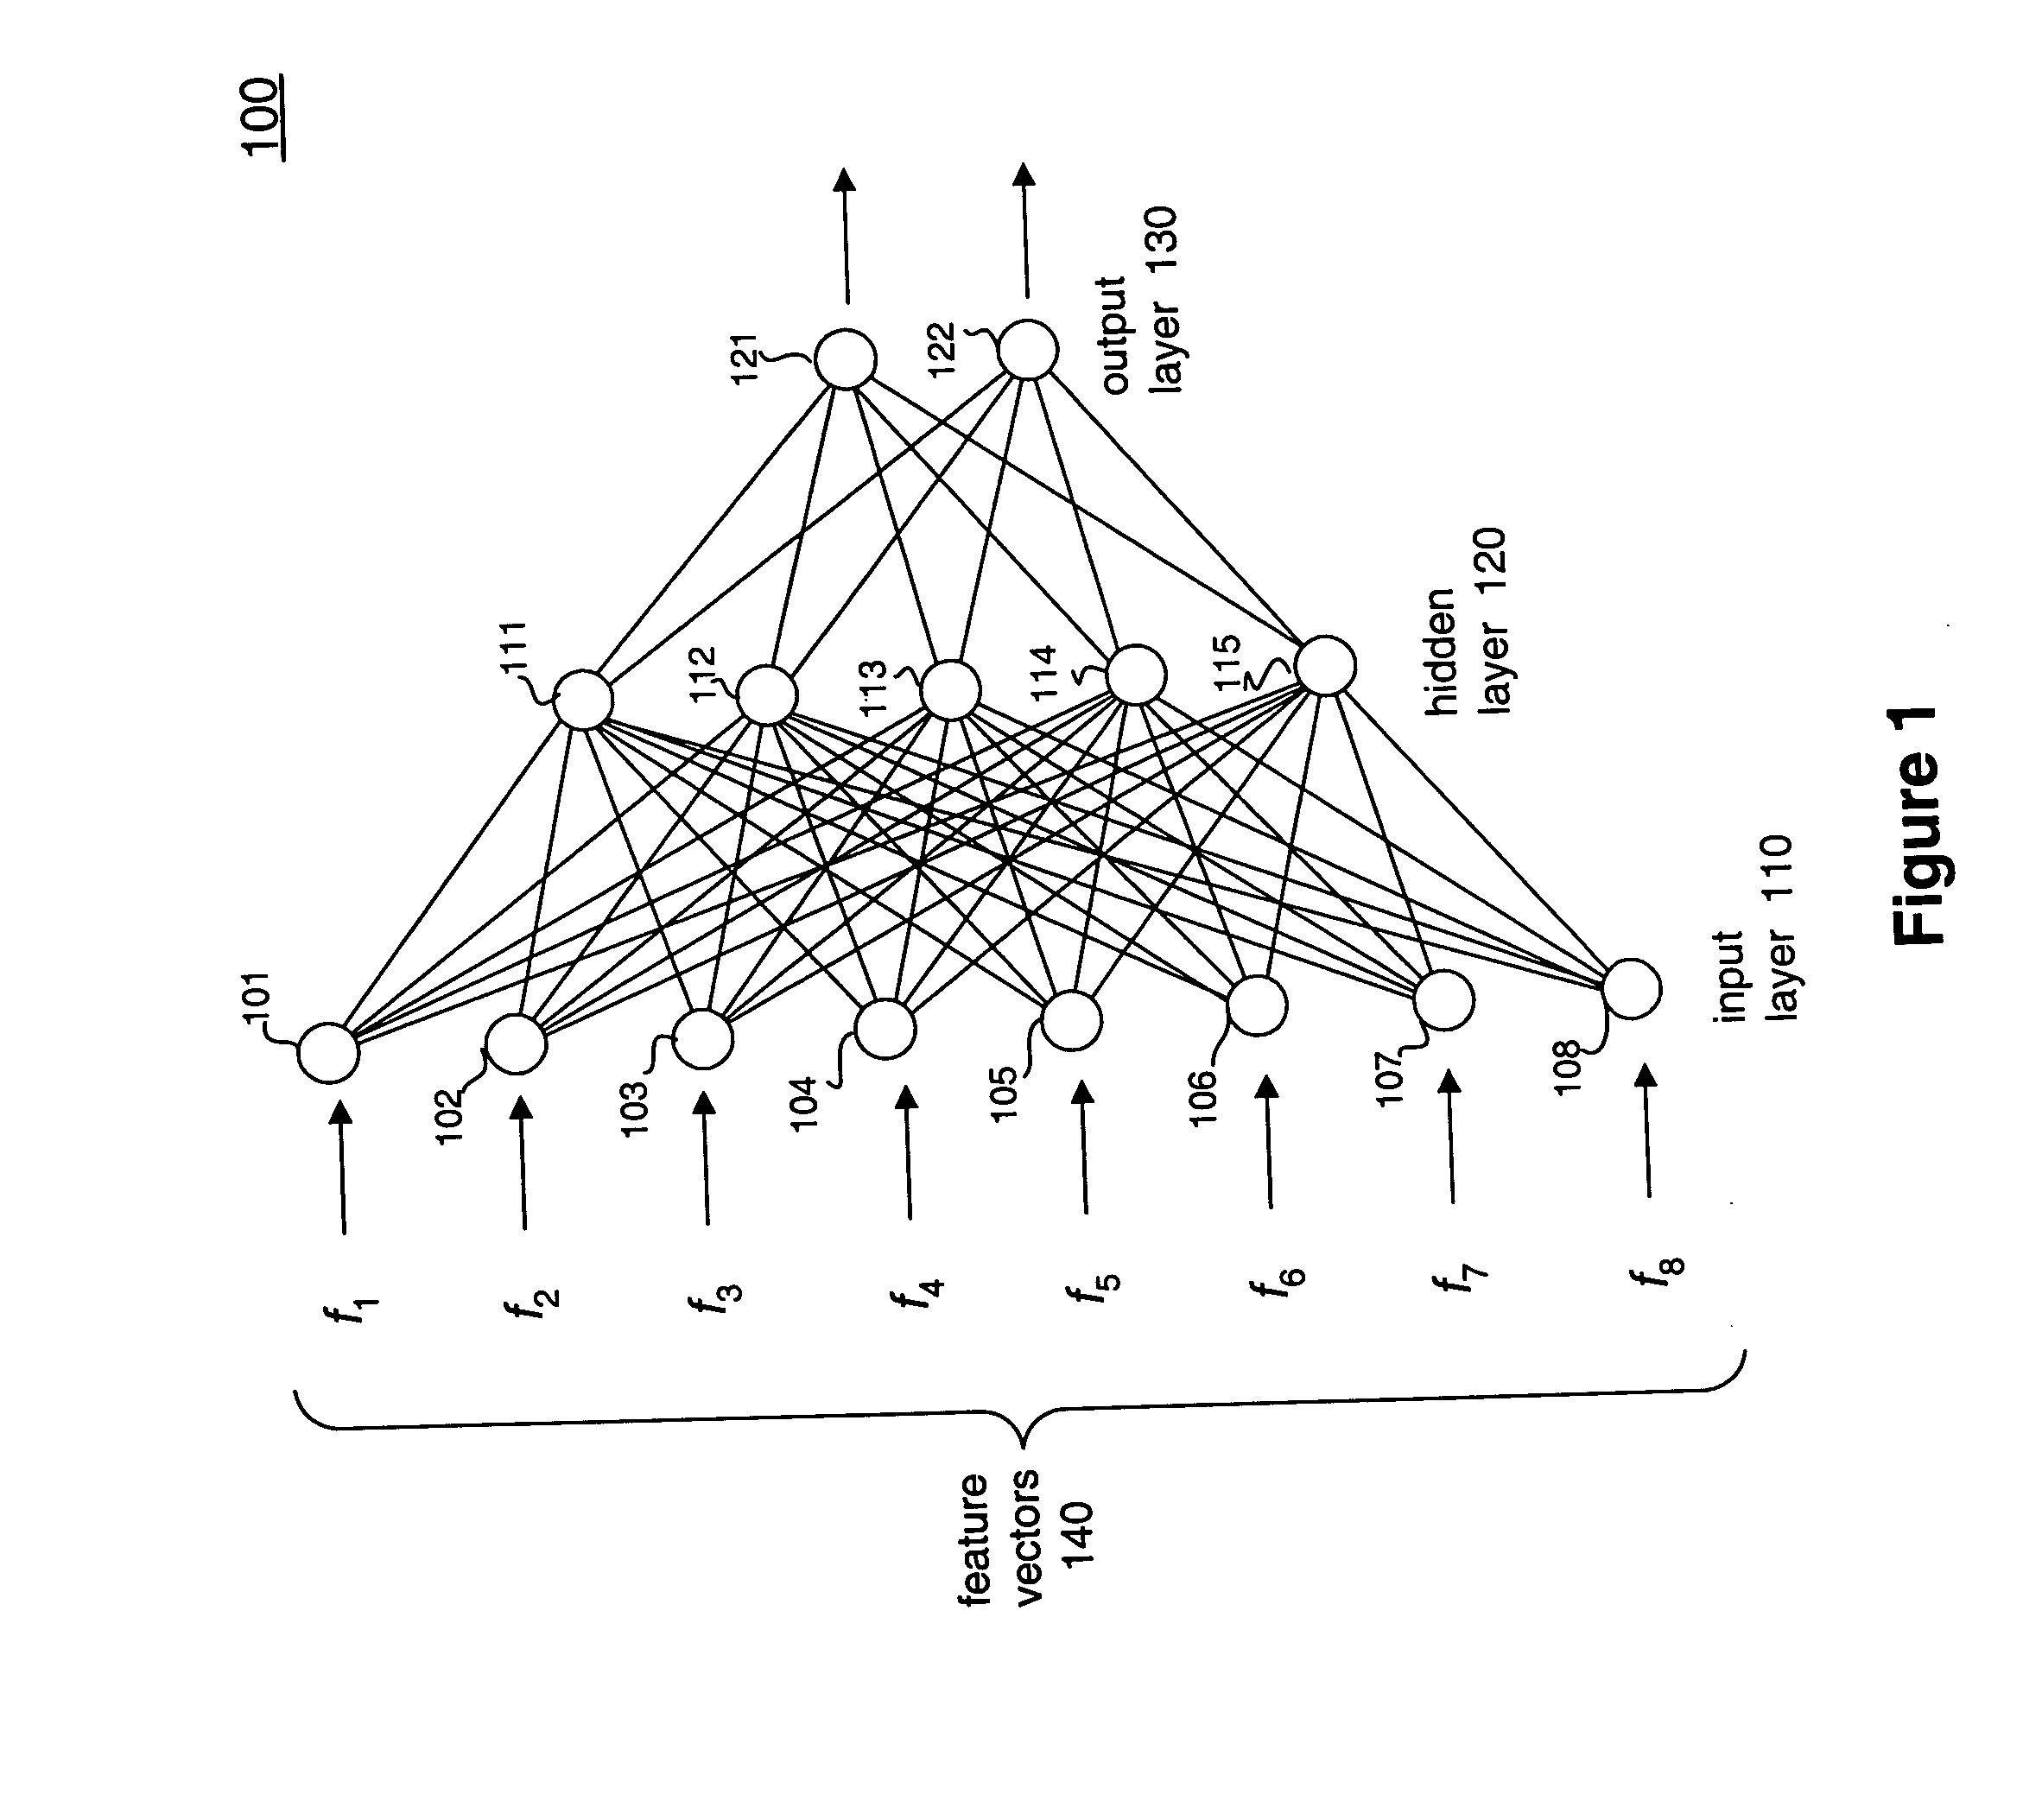 Genetically adaptive neural network classification systems and methods